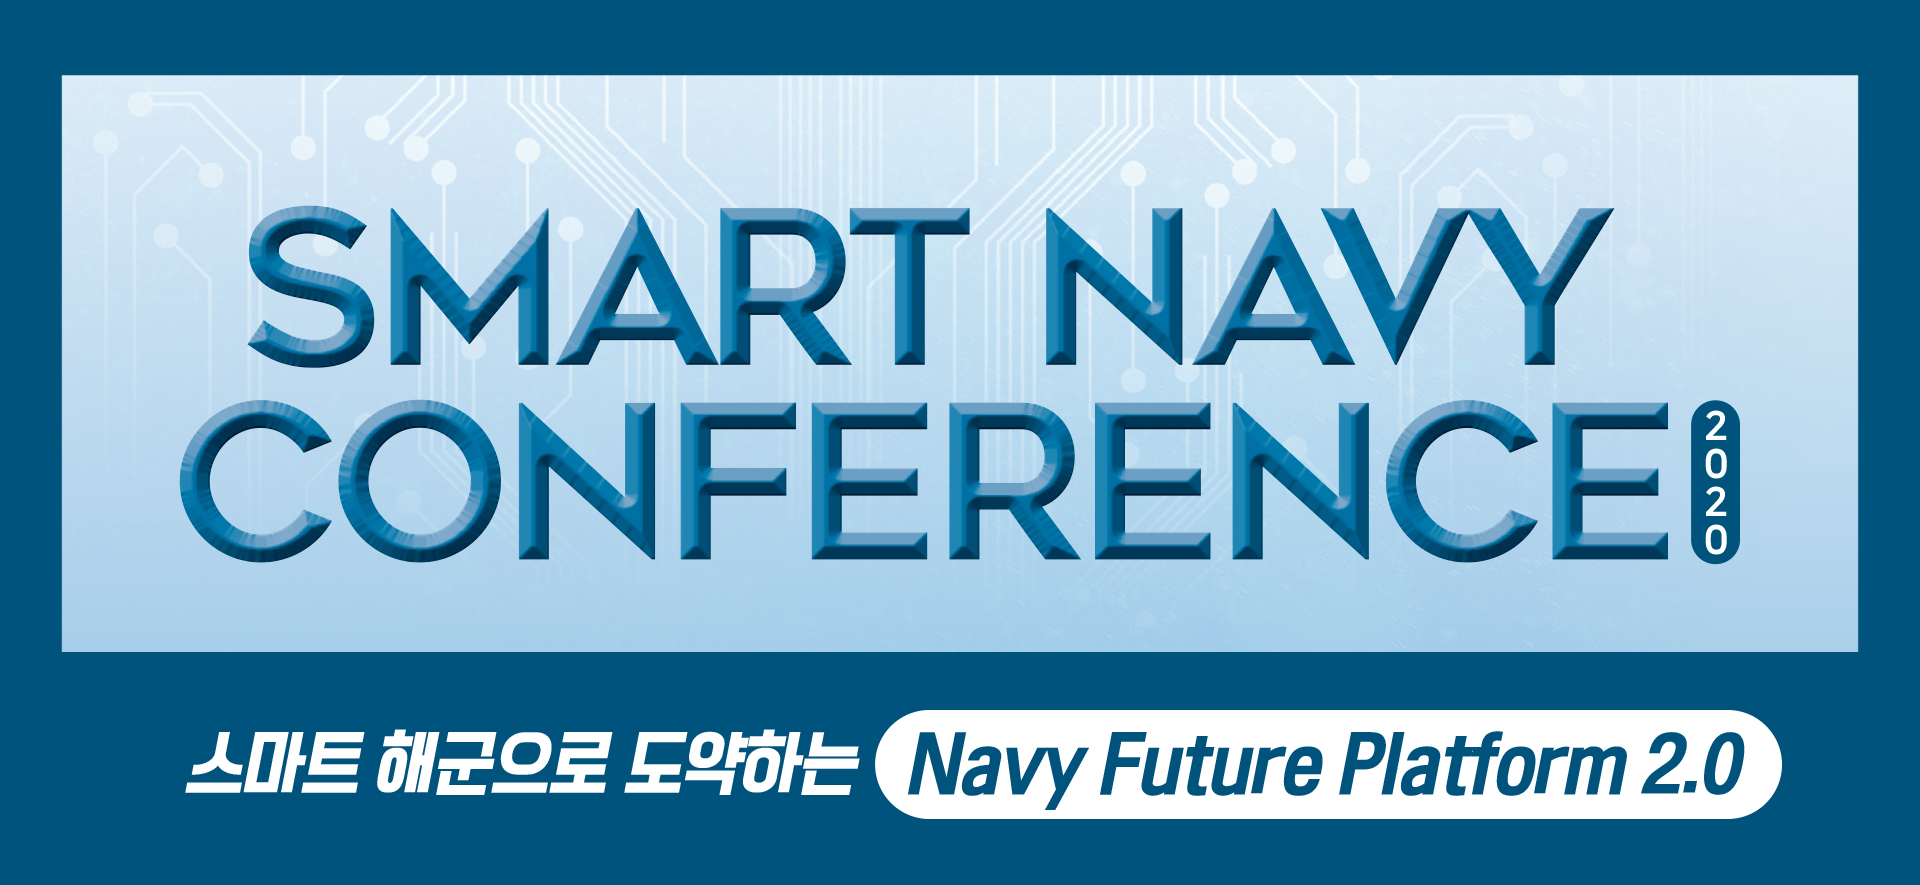 SMART NAVY CONFERENCE 2020